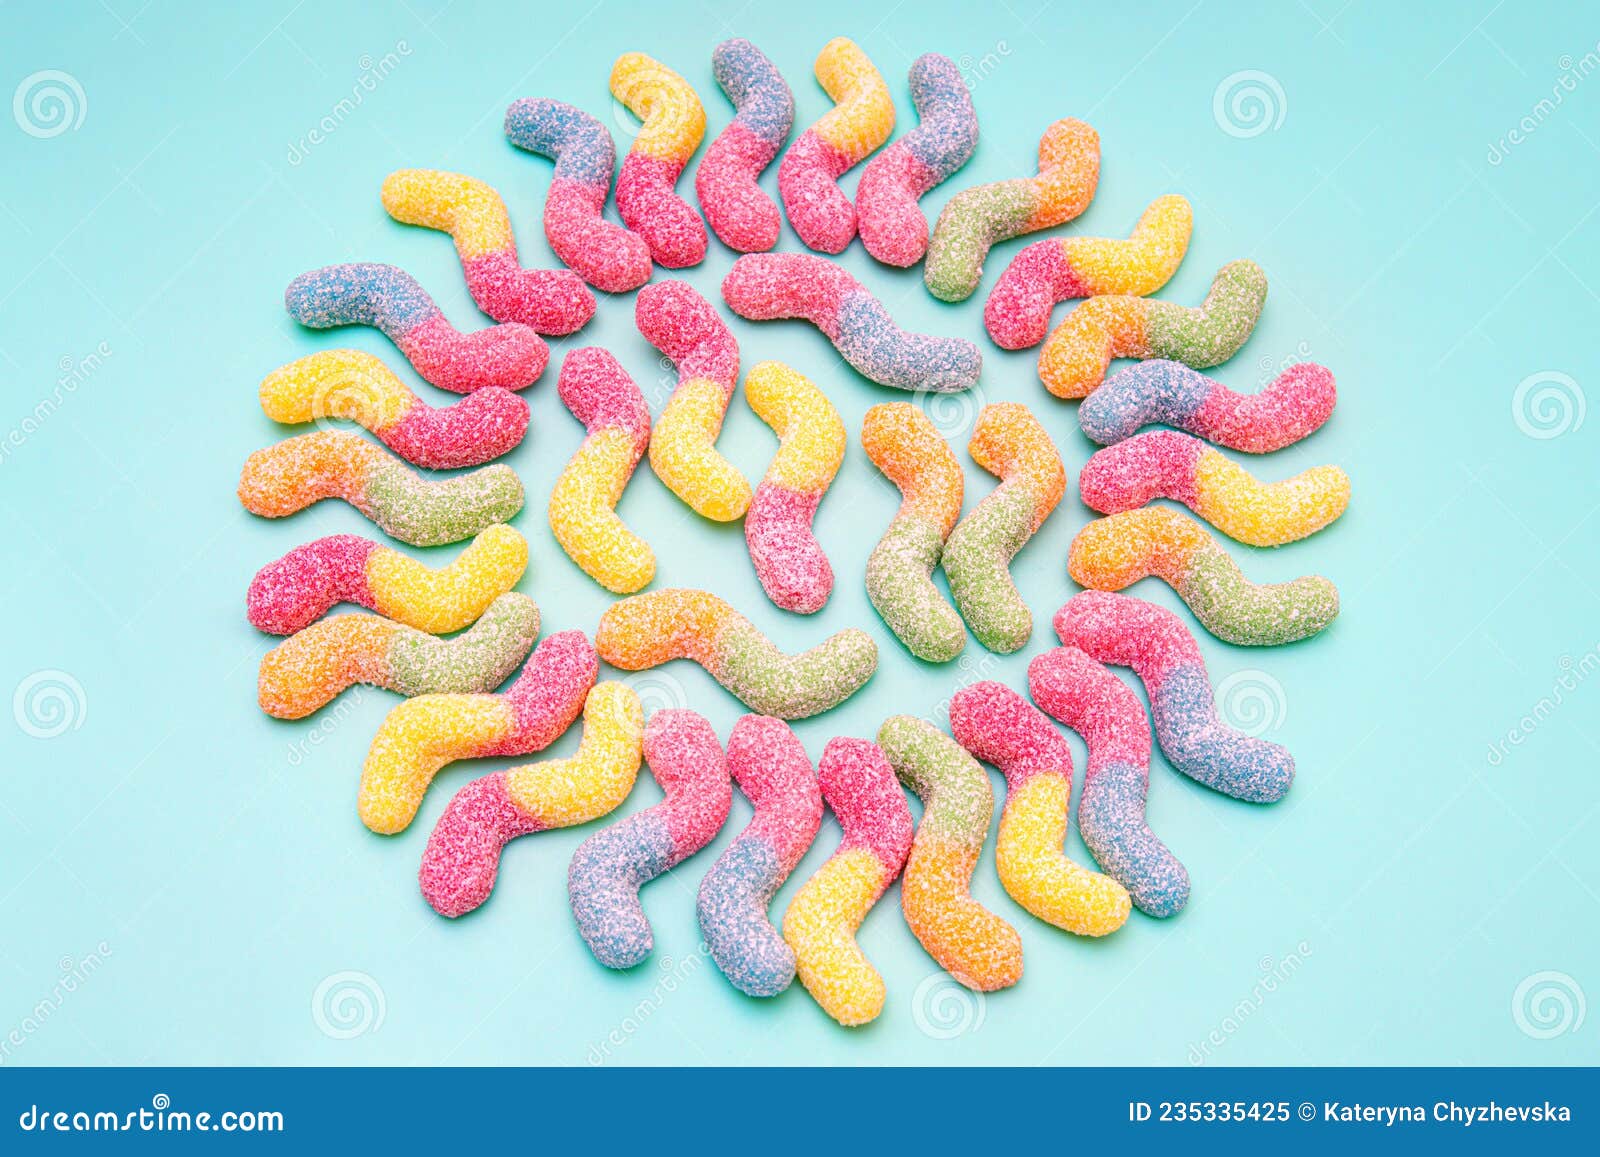 Sun made of gummy candies stock image. Image of isolated - 235335425